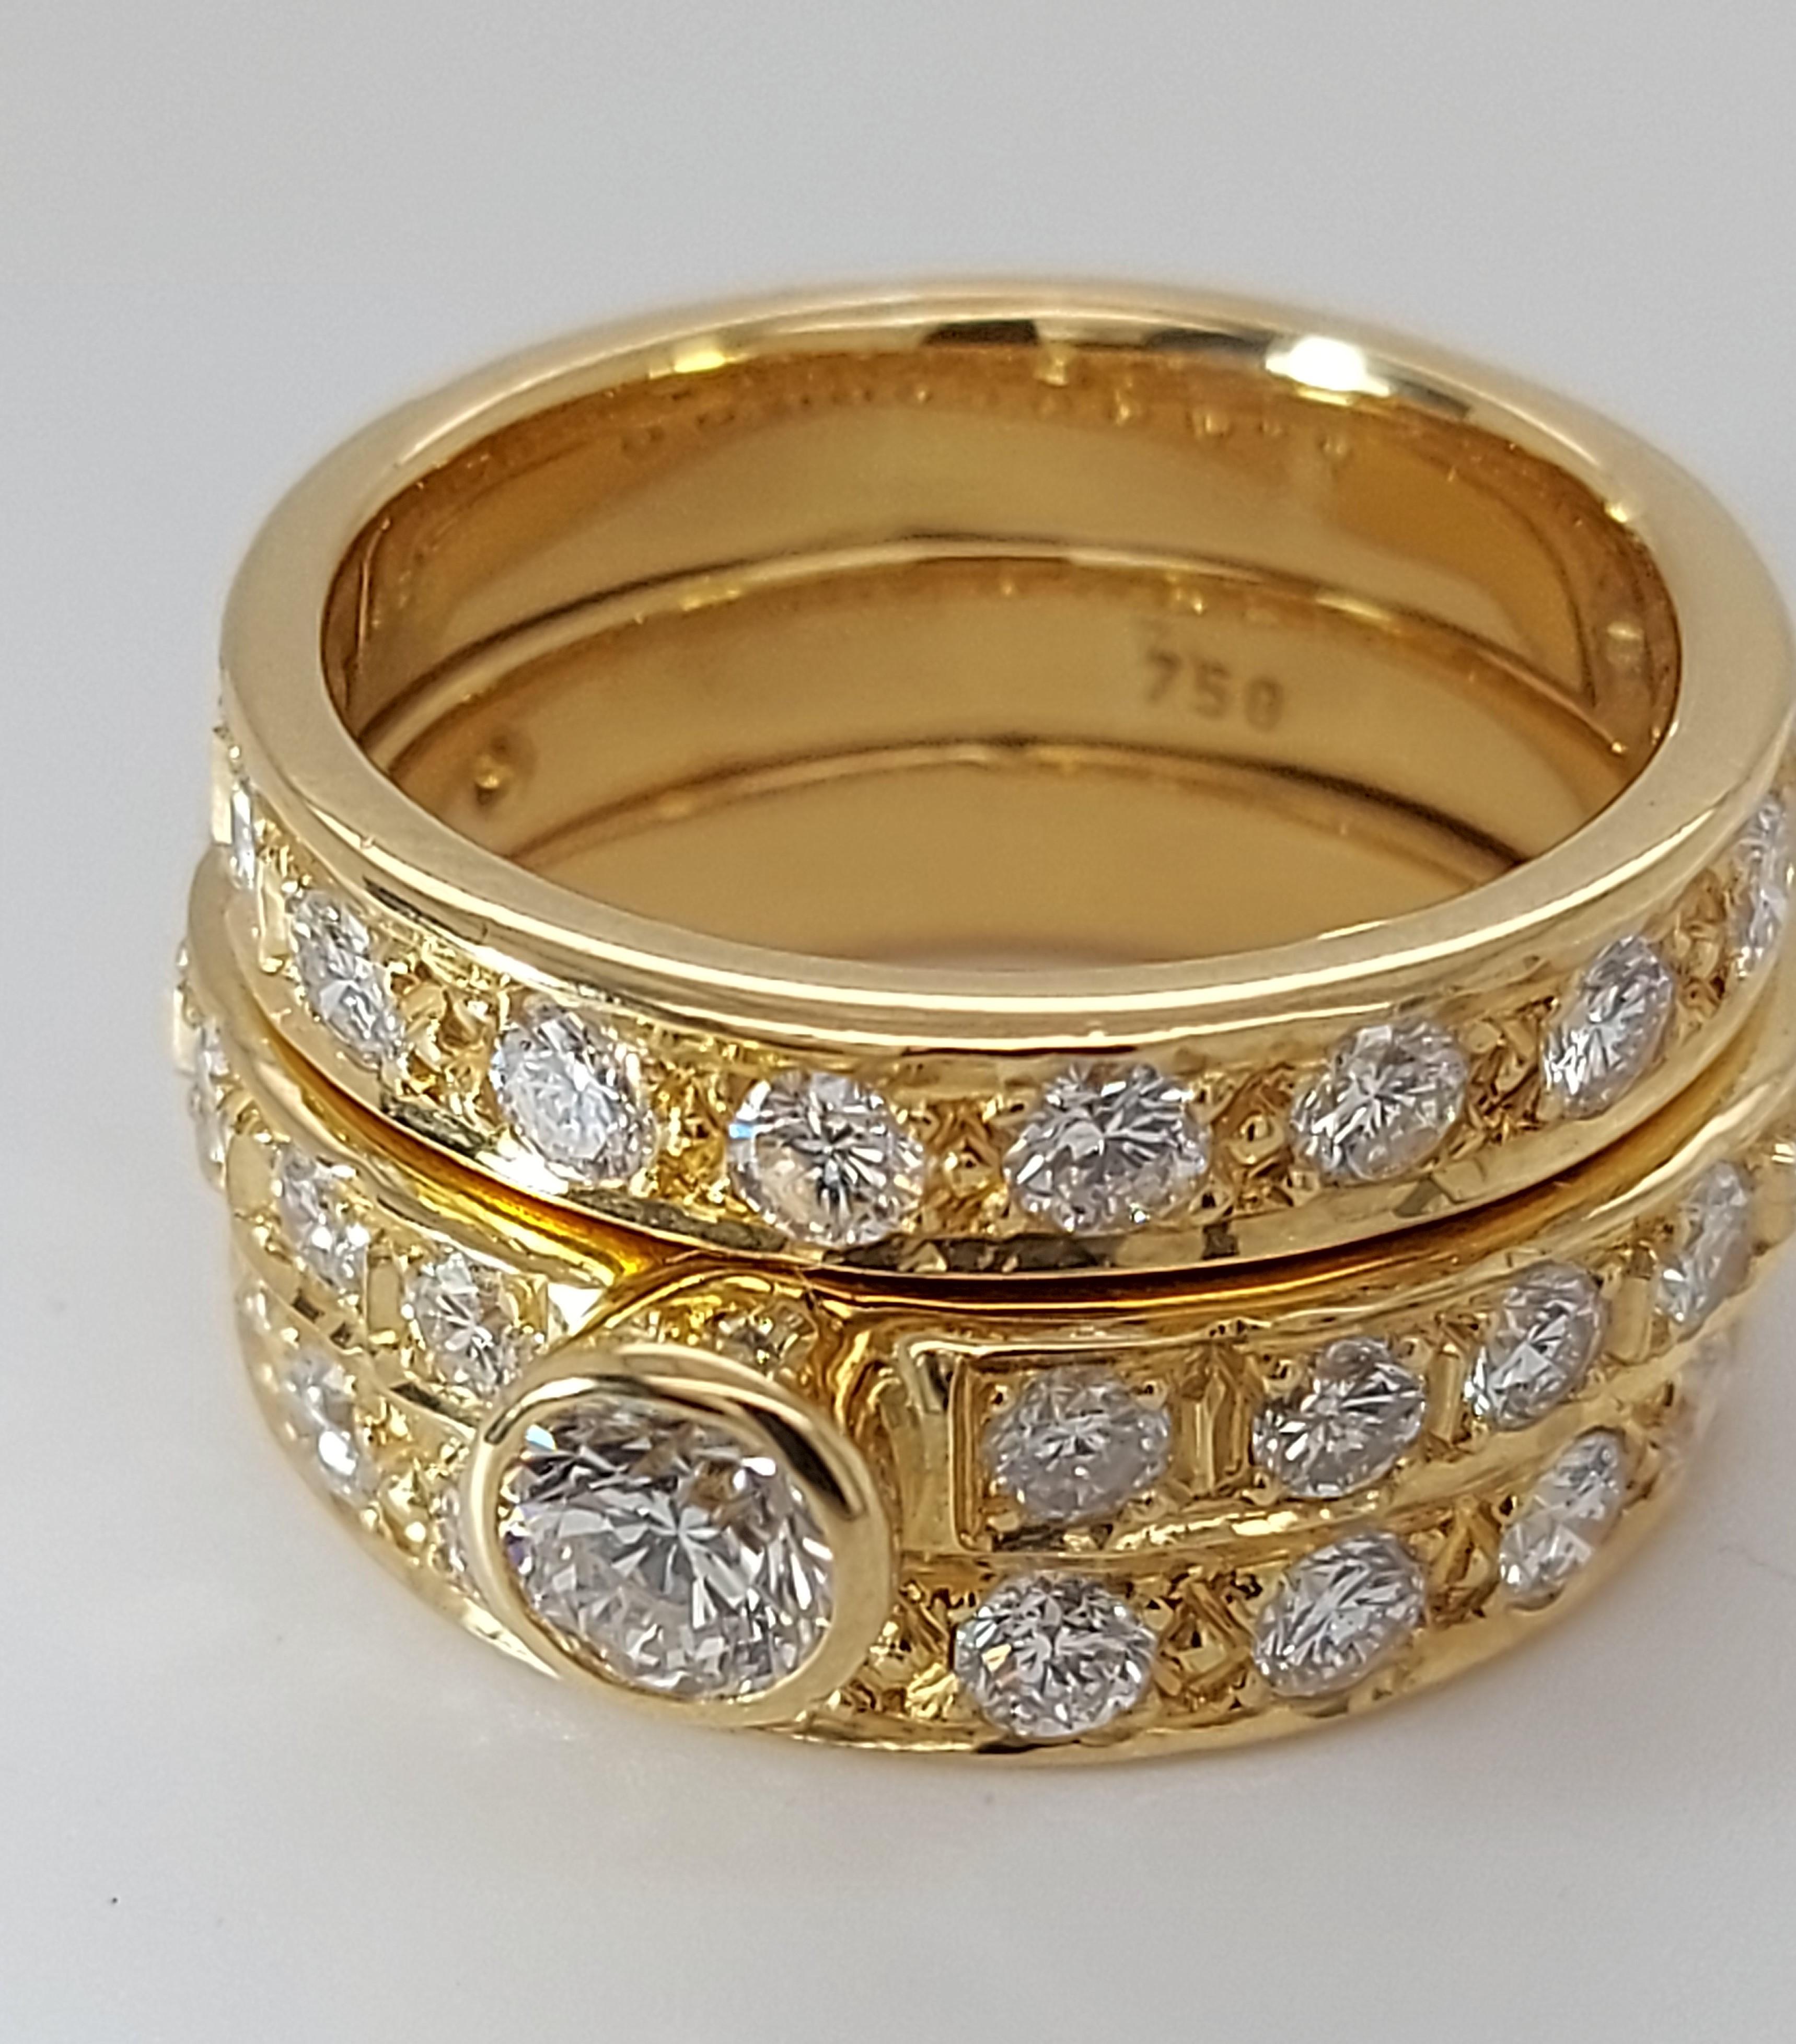 18kt Yellow Gold Detachable Diamond Ring and Engagement Ring.
Glamorous 2 piece yellow gold diamond ring, Can be separated and used as wedding and engagement ring

Diamond: The main diamond is ca. 0,5 ct and is surrounded by another 34 diamonds